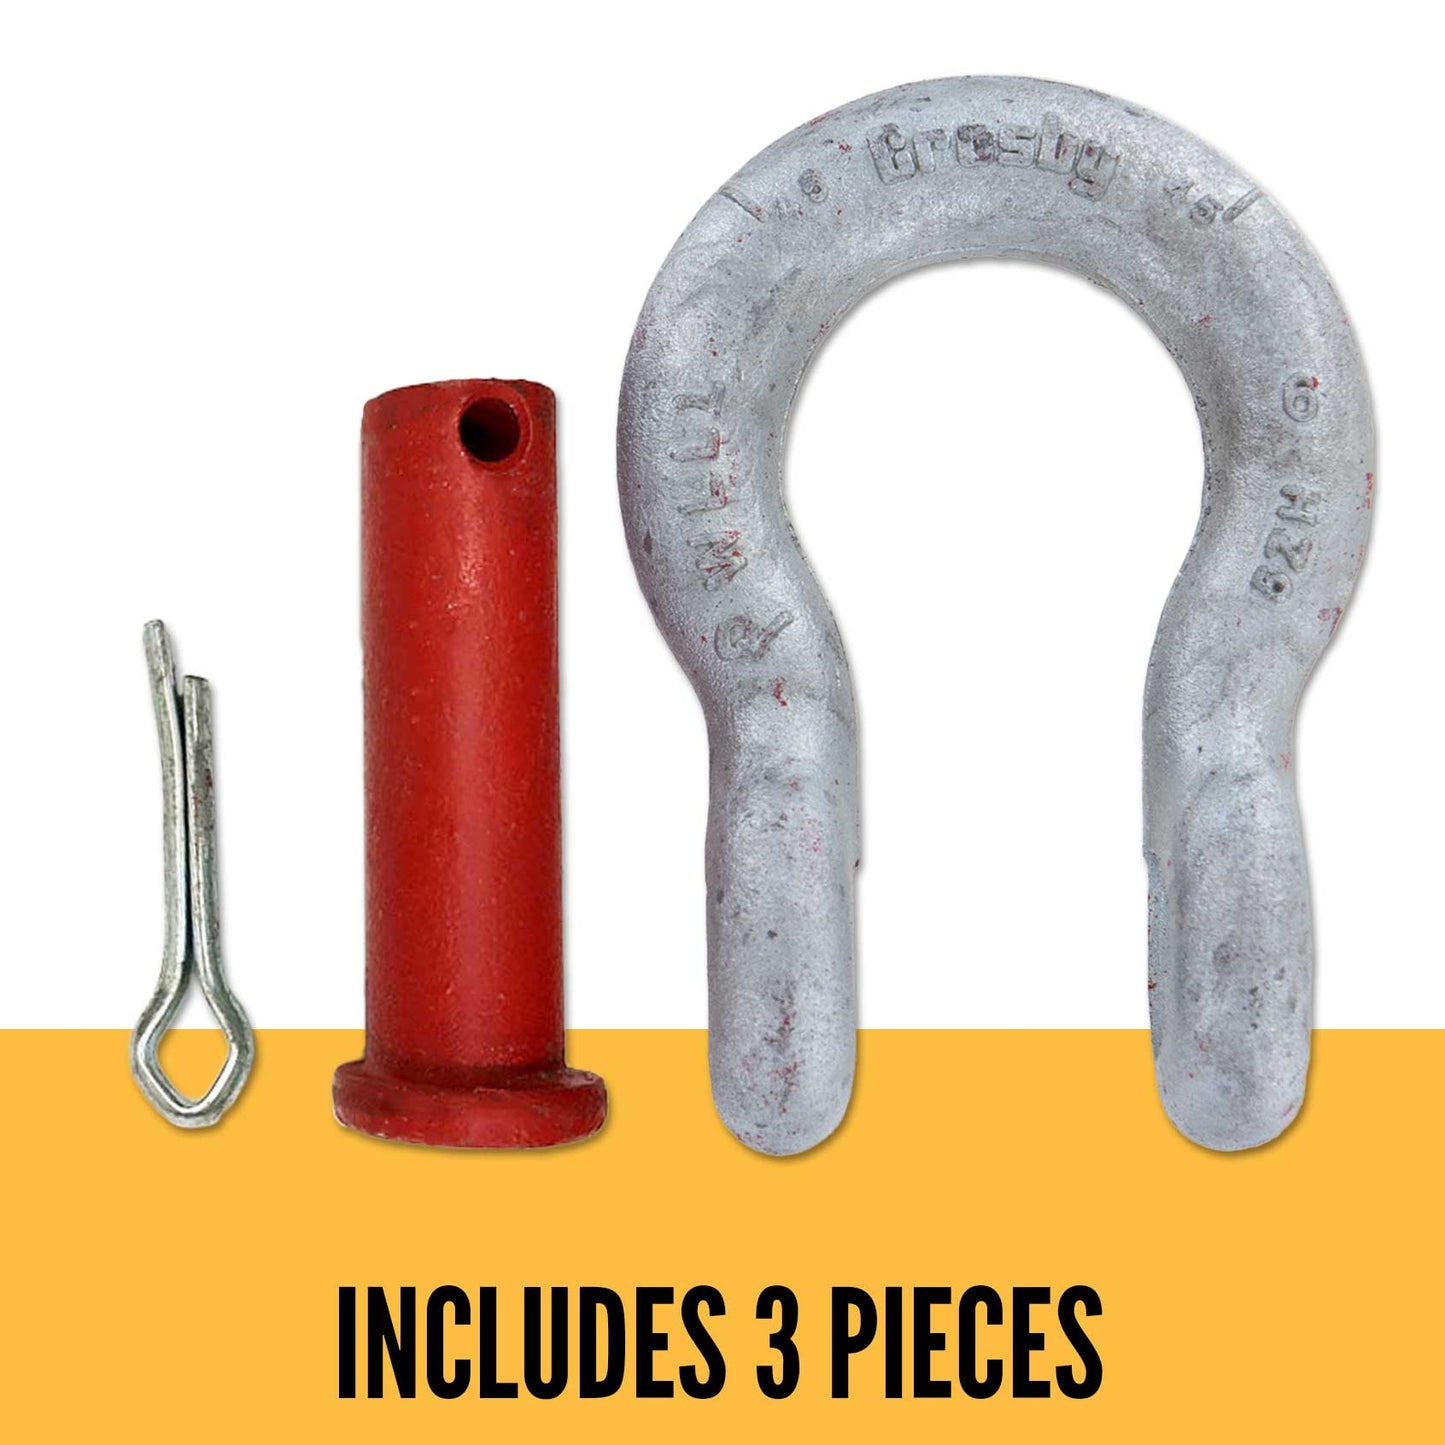 5/16" Crosby® Round Pin Anchor Shackle | G-213 - 0.75 Ton parts of a shackle